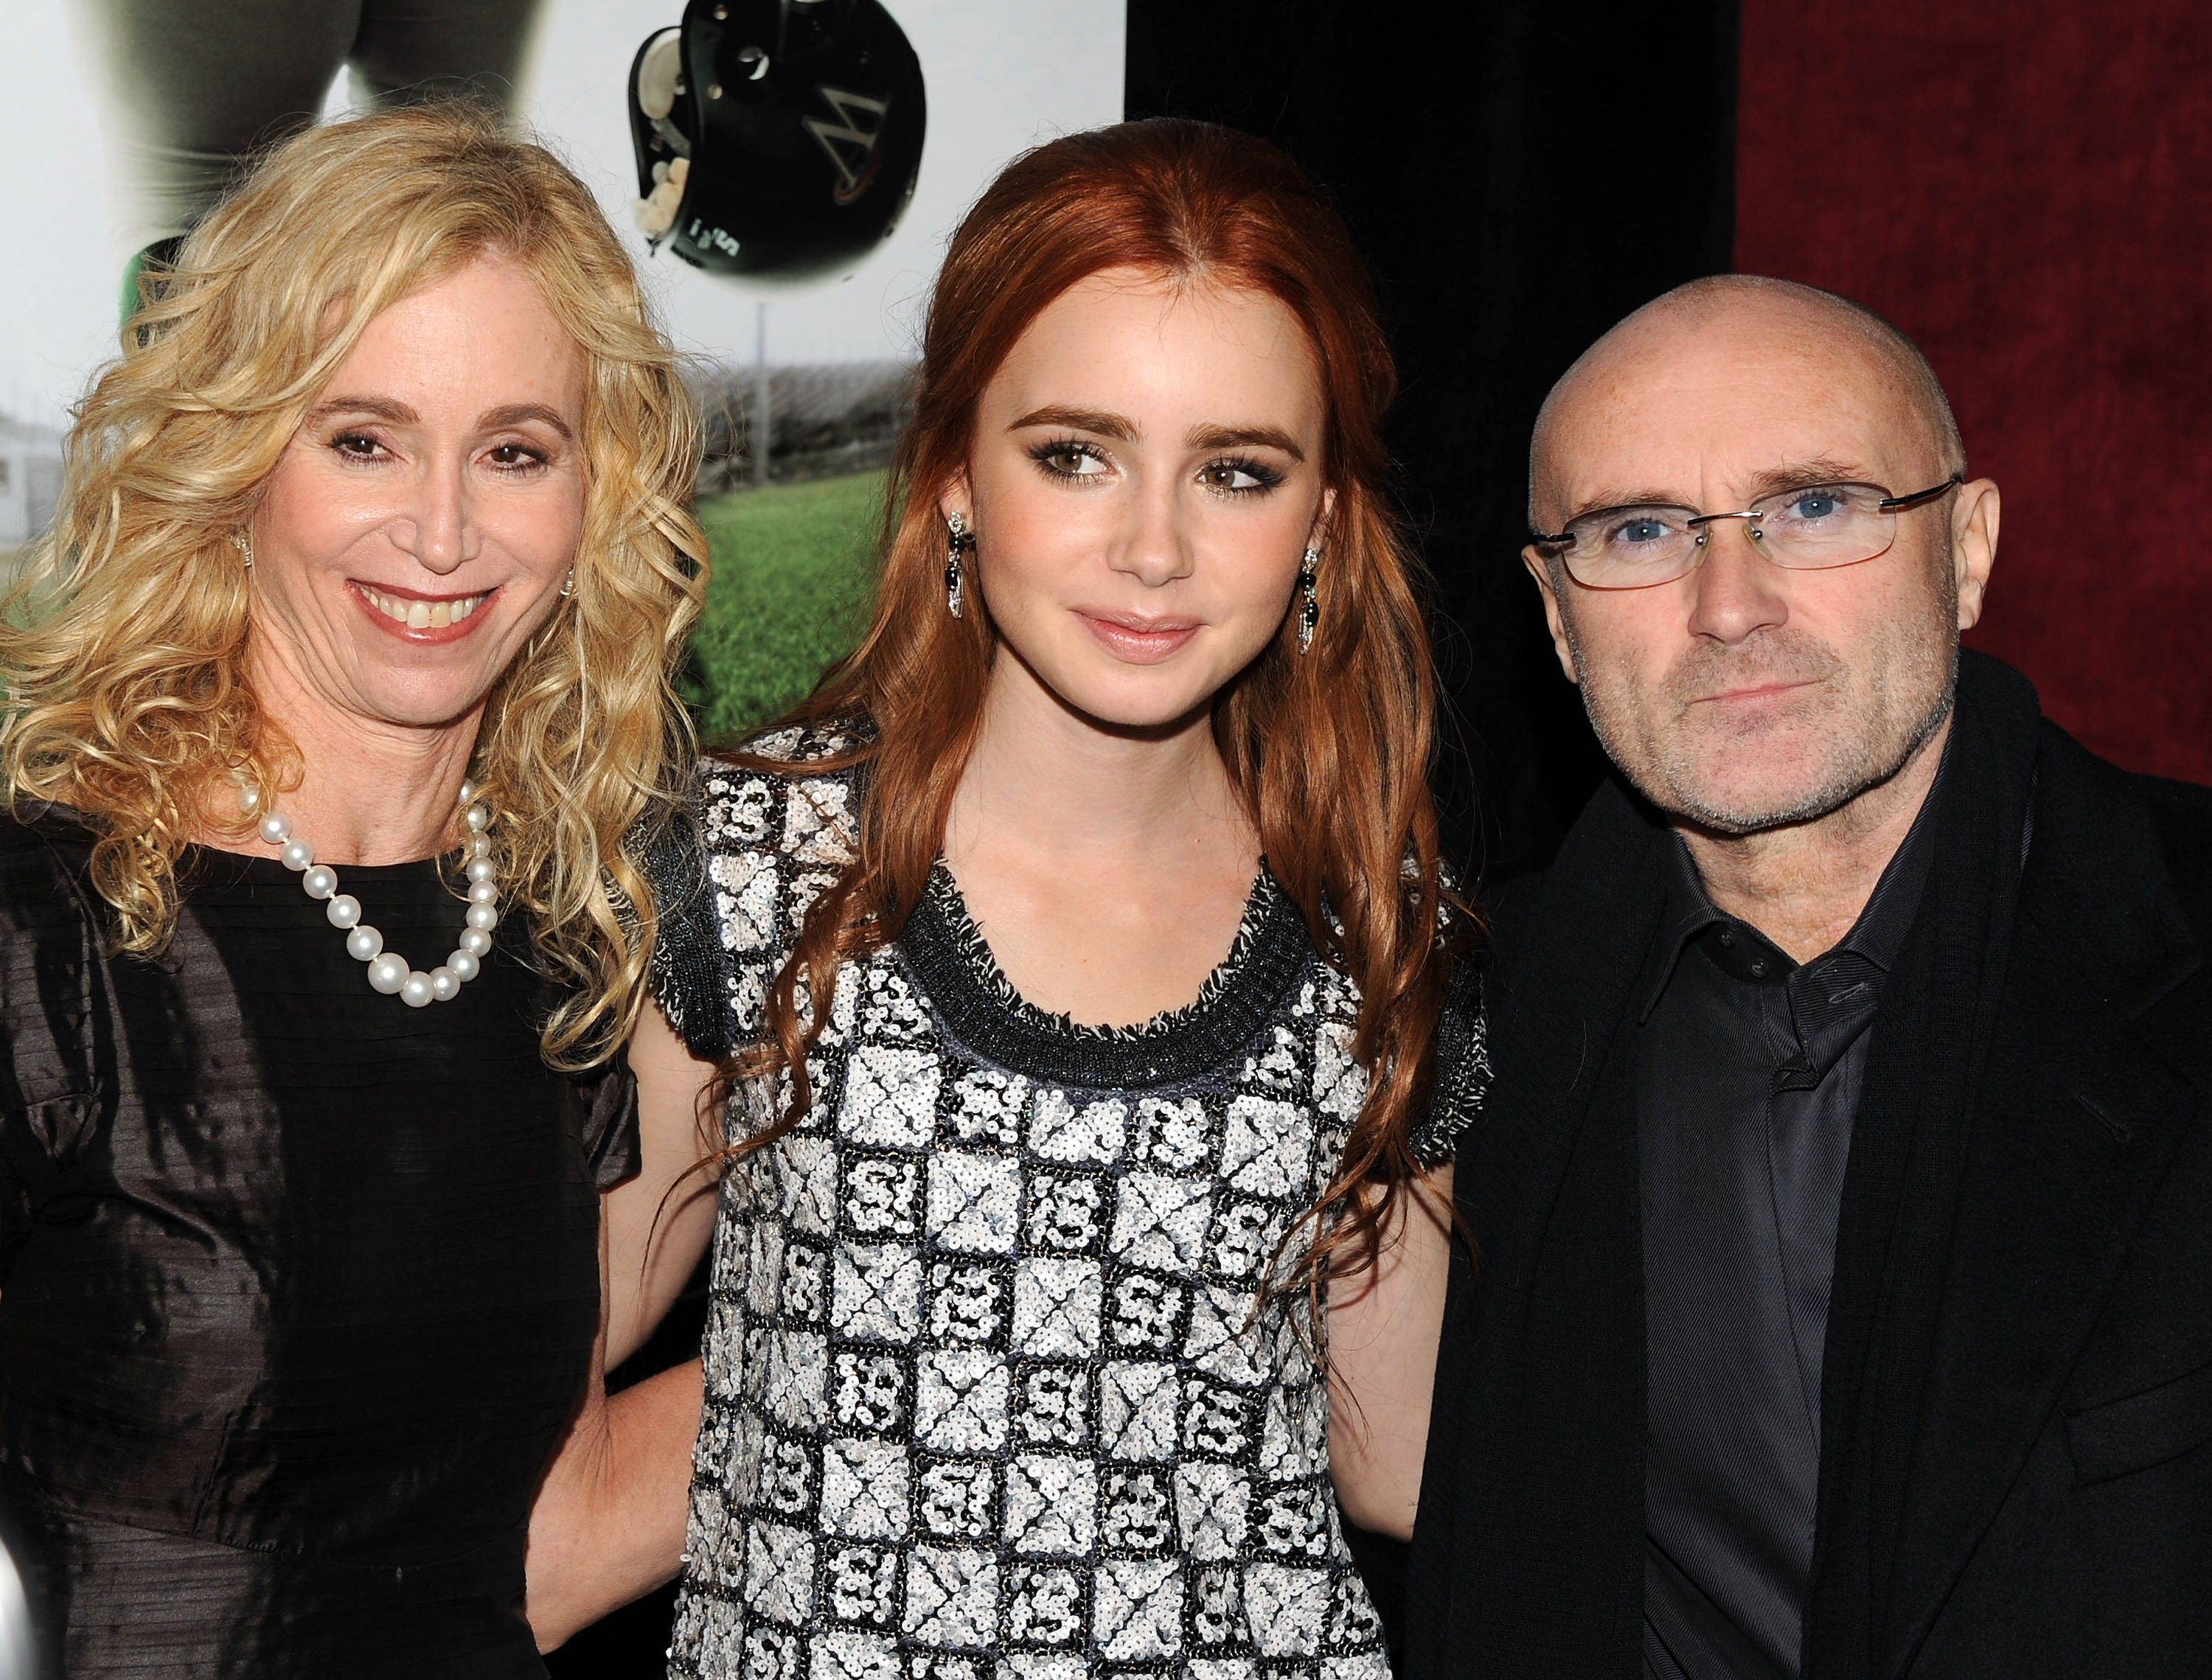 L-R) Jill Collins, actress Lily Collins and musician Phil Collins attend the premiere of "The Blind Side" at the Ziegfeld Theatre on November 17, 2009, in New York City. | Source: Getty Images